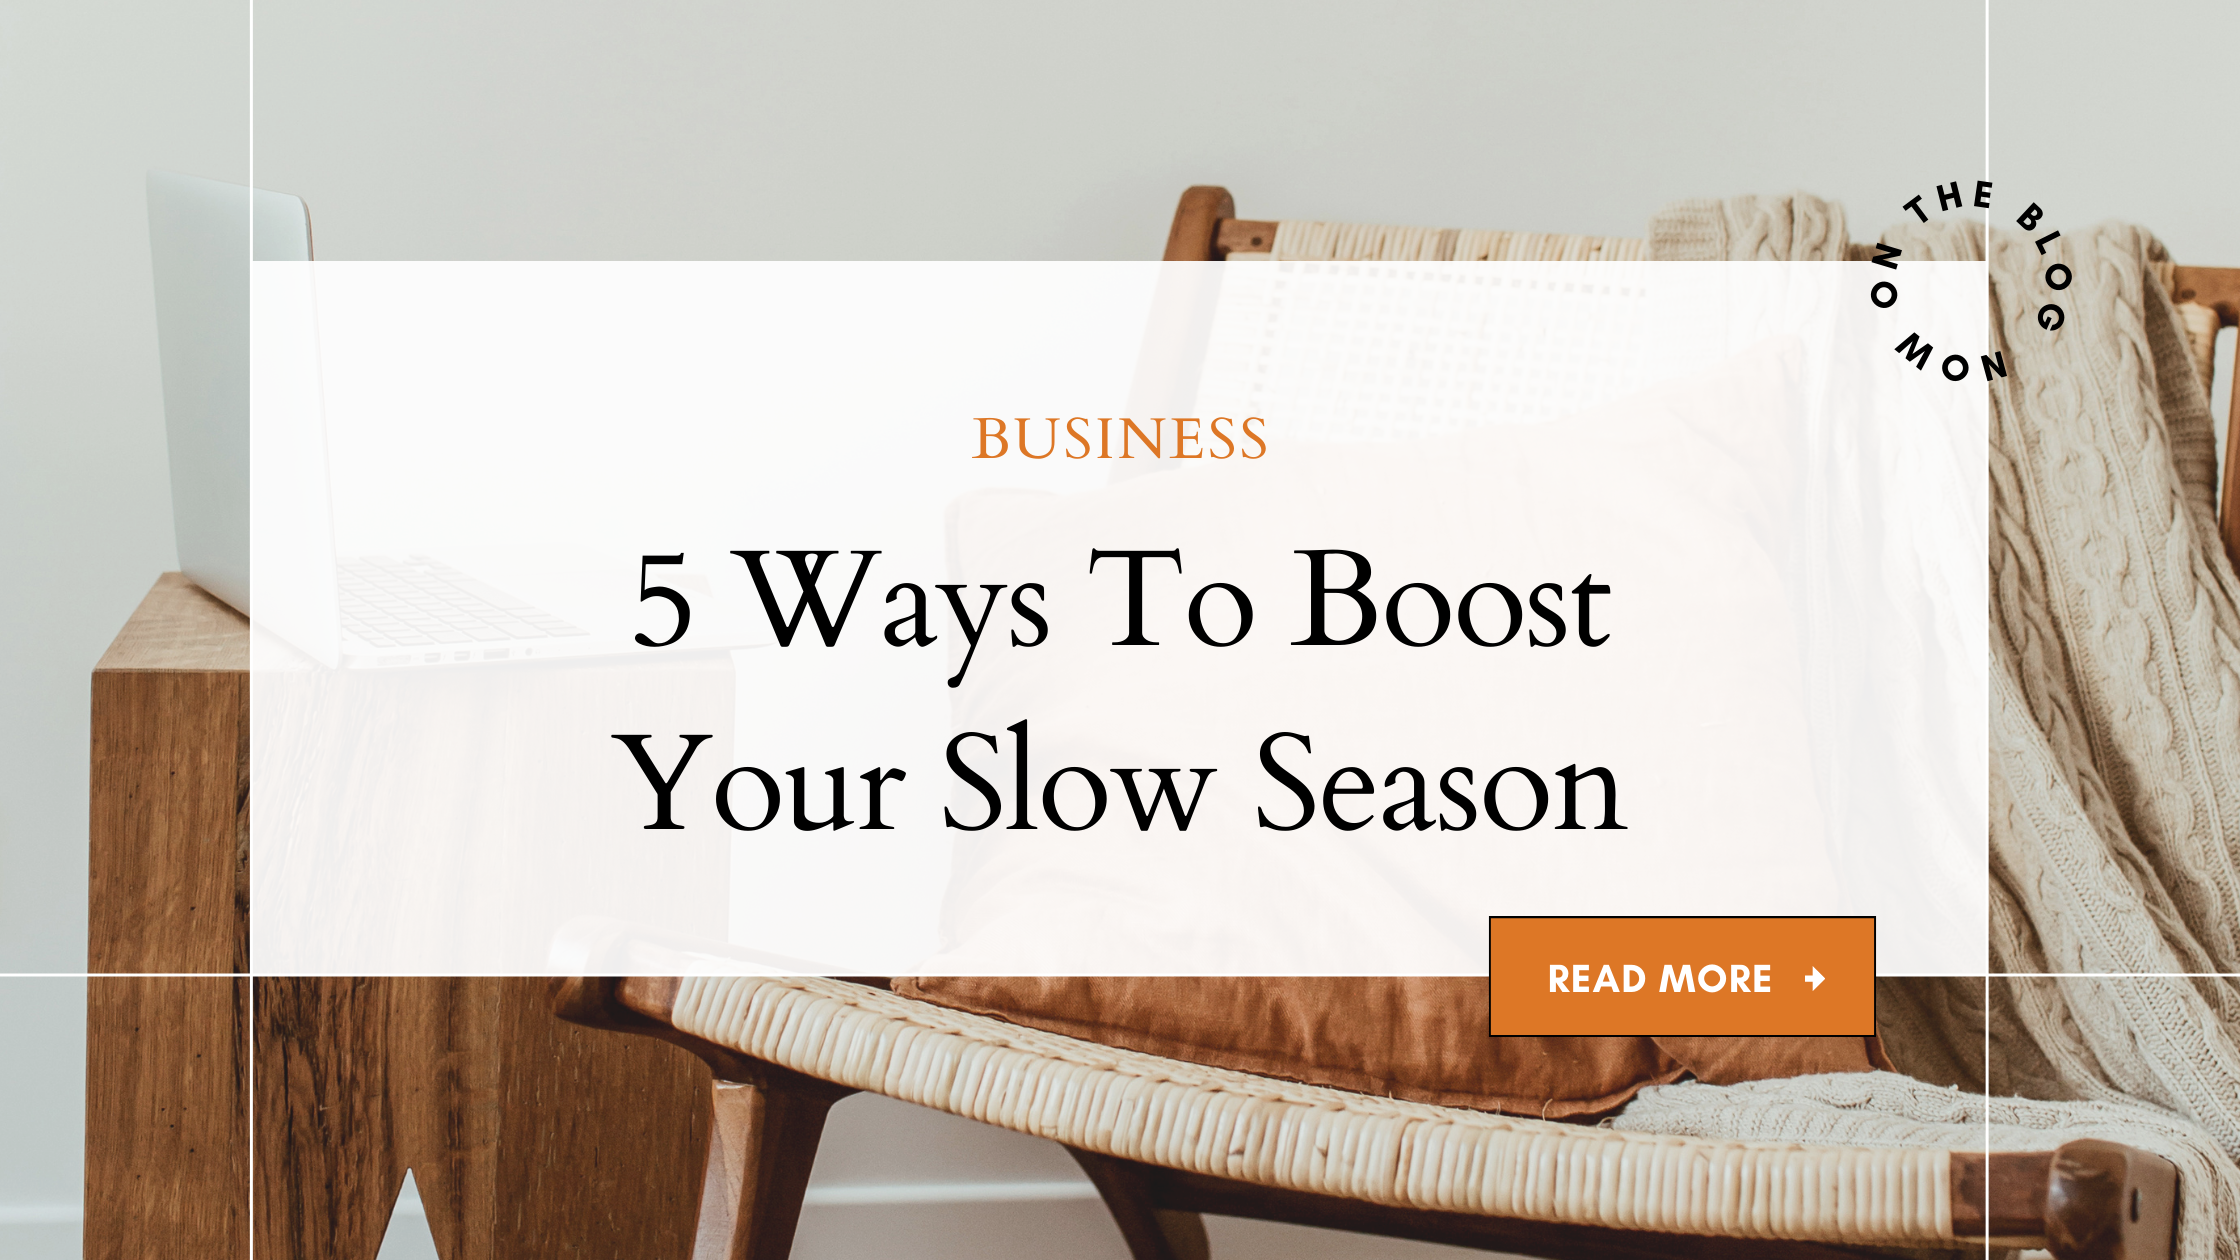 Boost your photography business during slow season